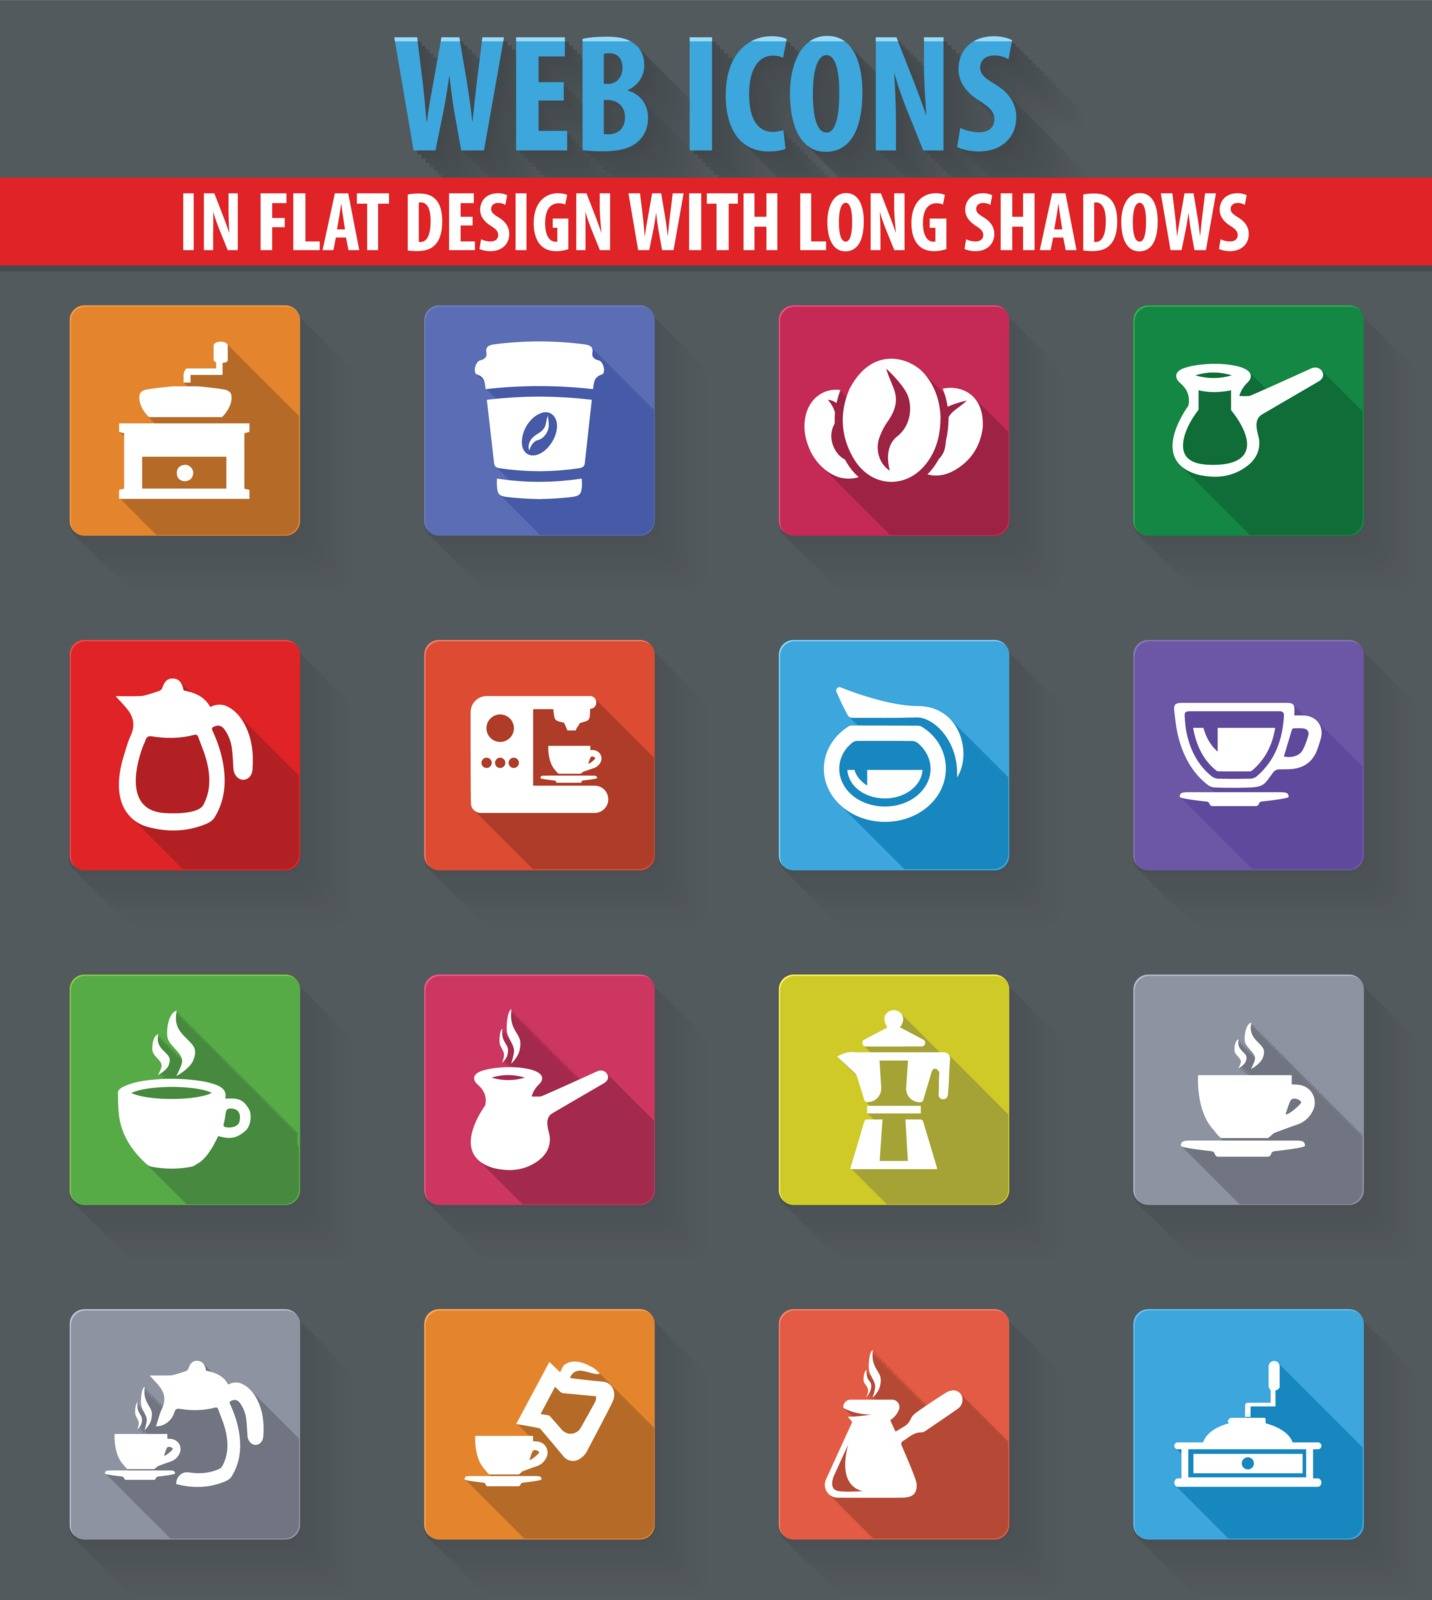 Coffee web icons in flat design with long shadows